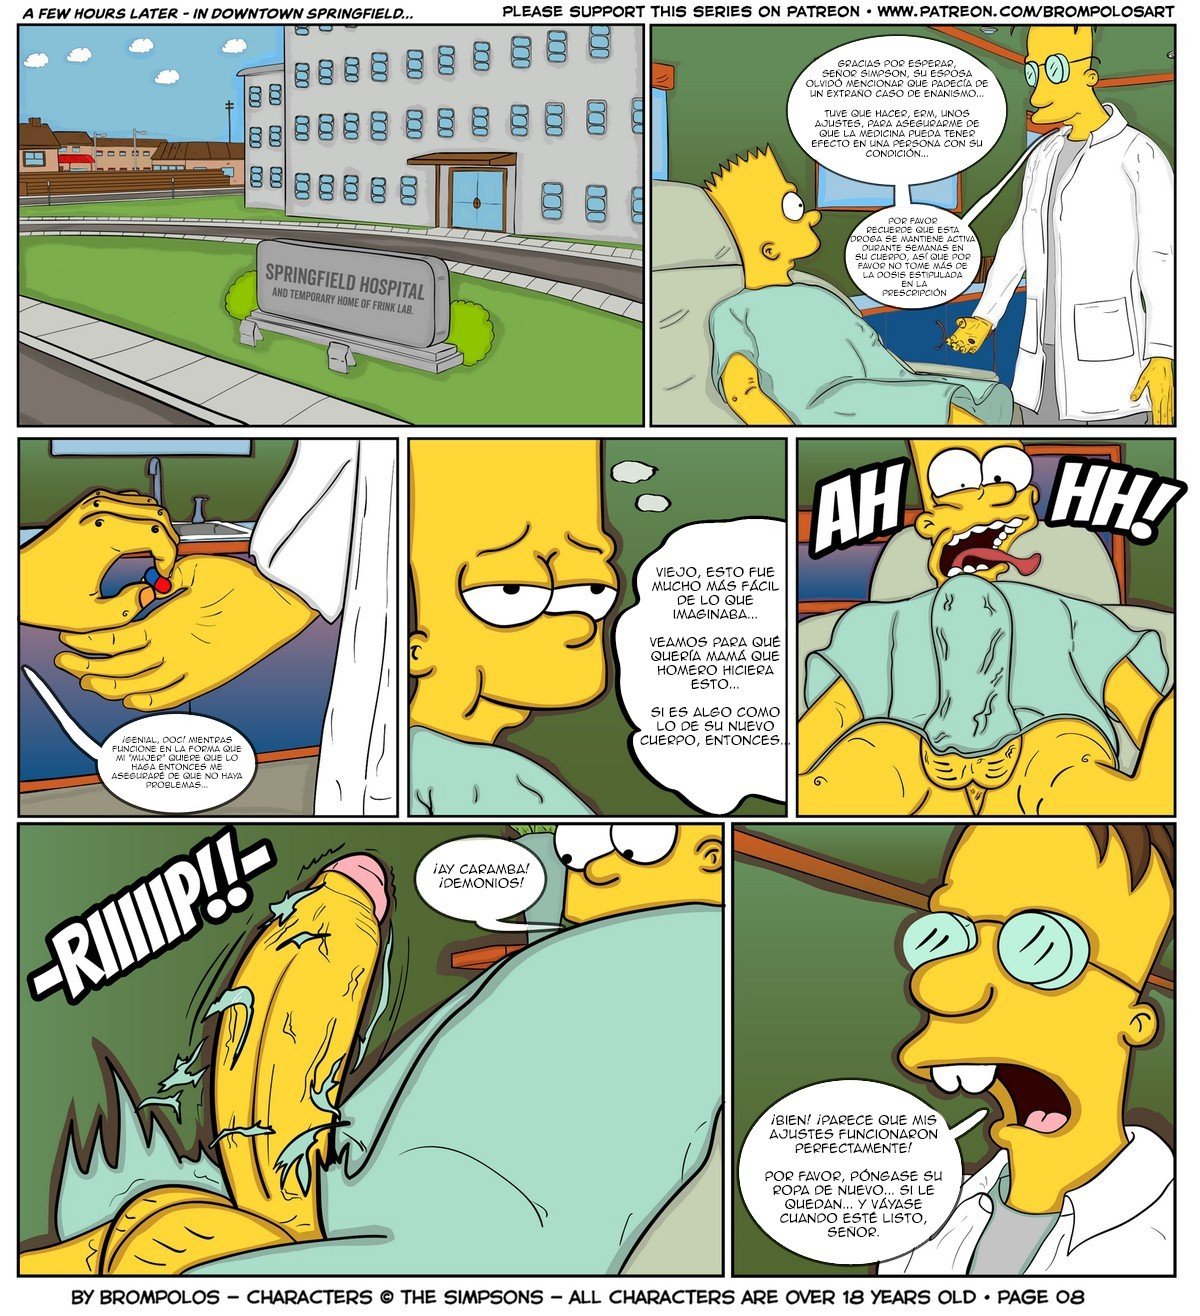 The Simpsons are The Sexenteins - 10